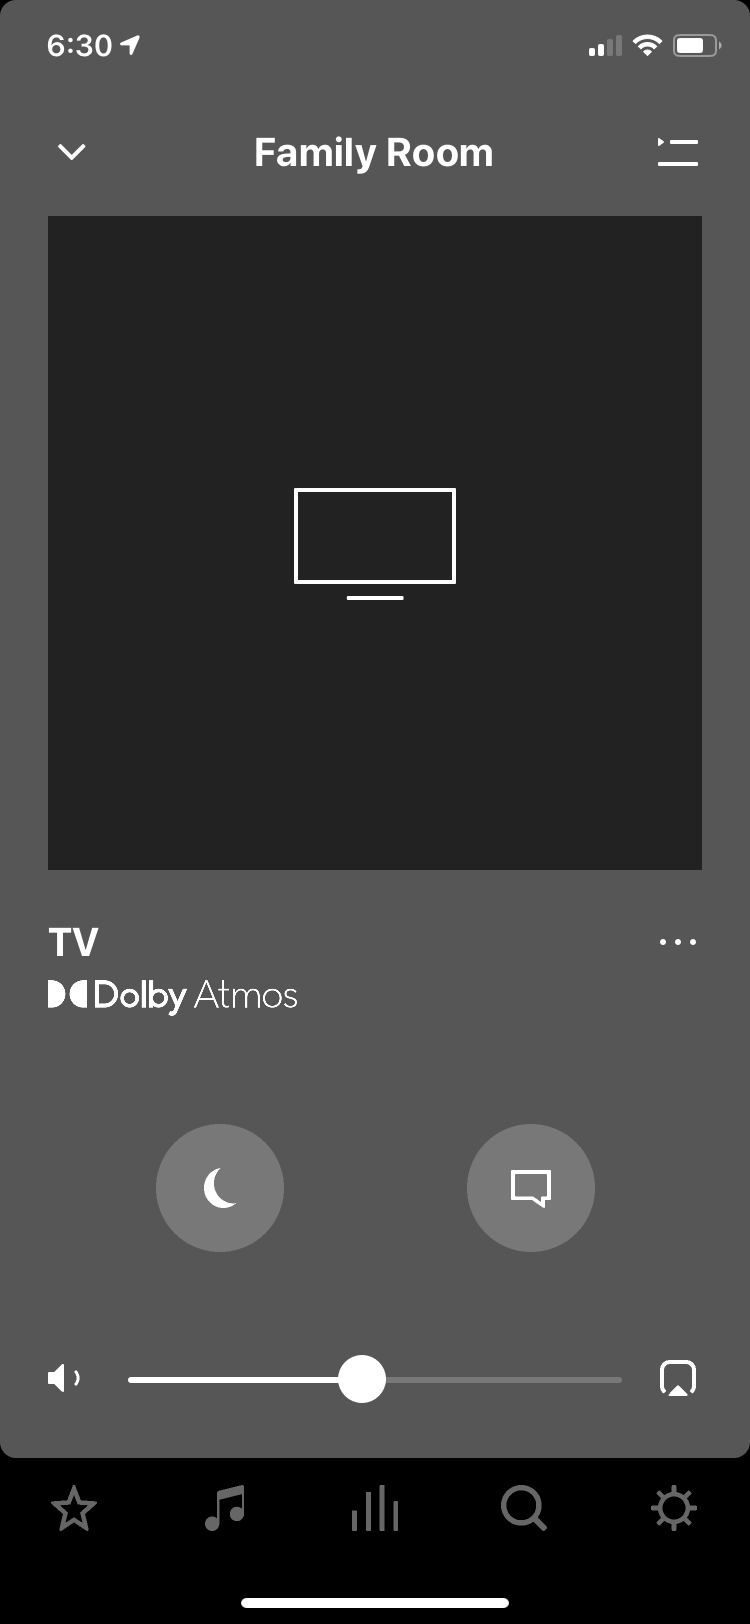 Sonos Delivers Dolby Atmos to Arc with AppleTV | Sonos Community